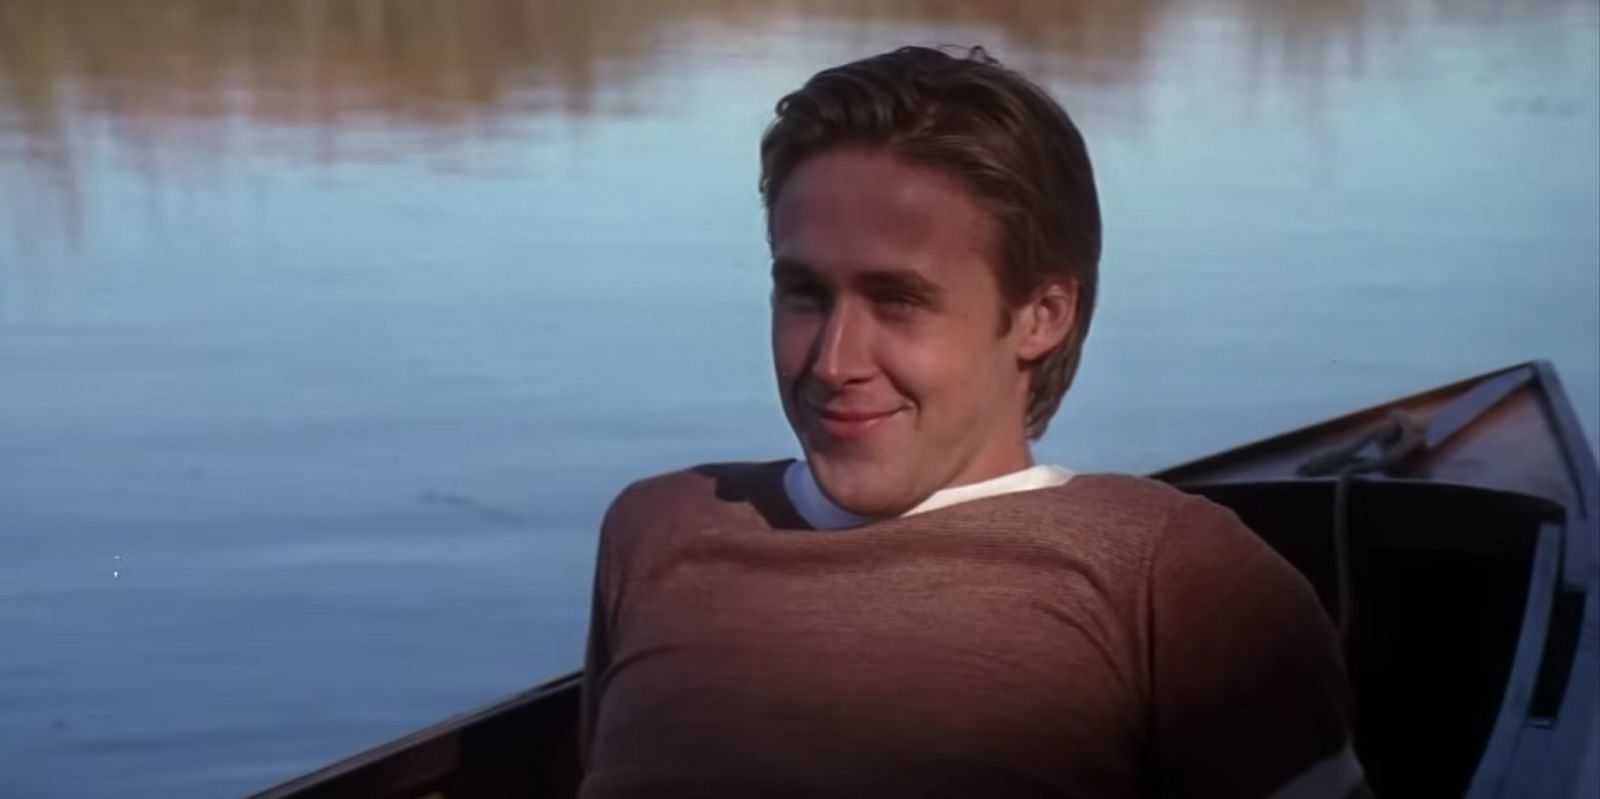 How old was Ryan Gosling in the Notebook?